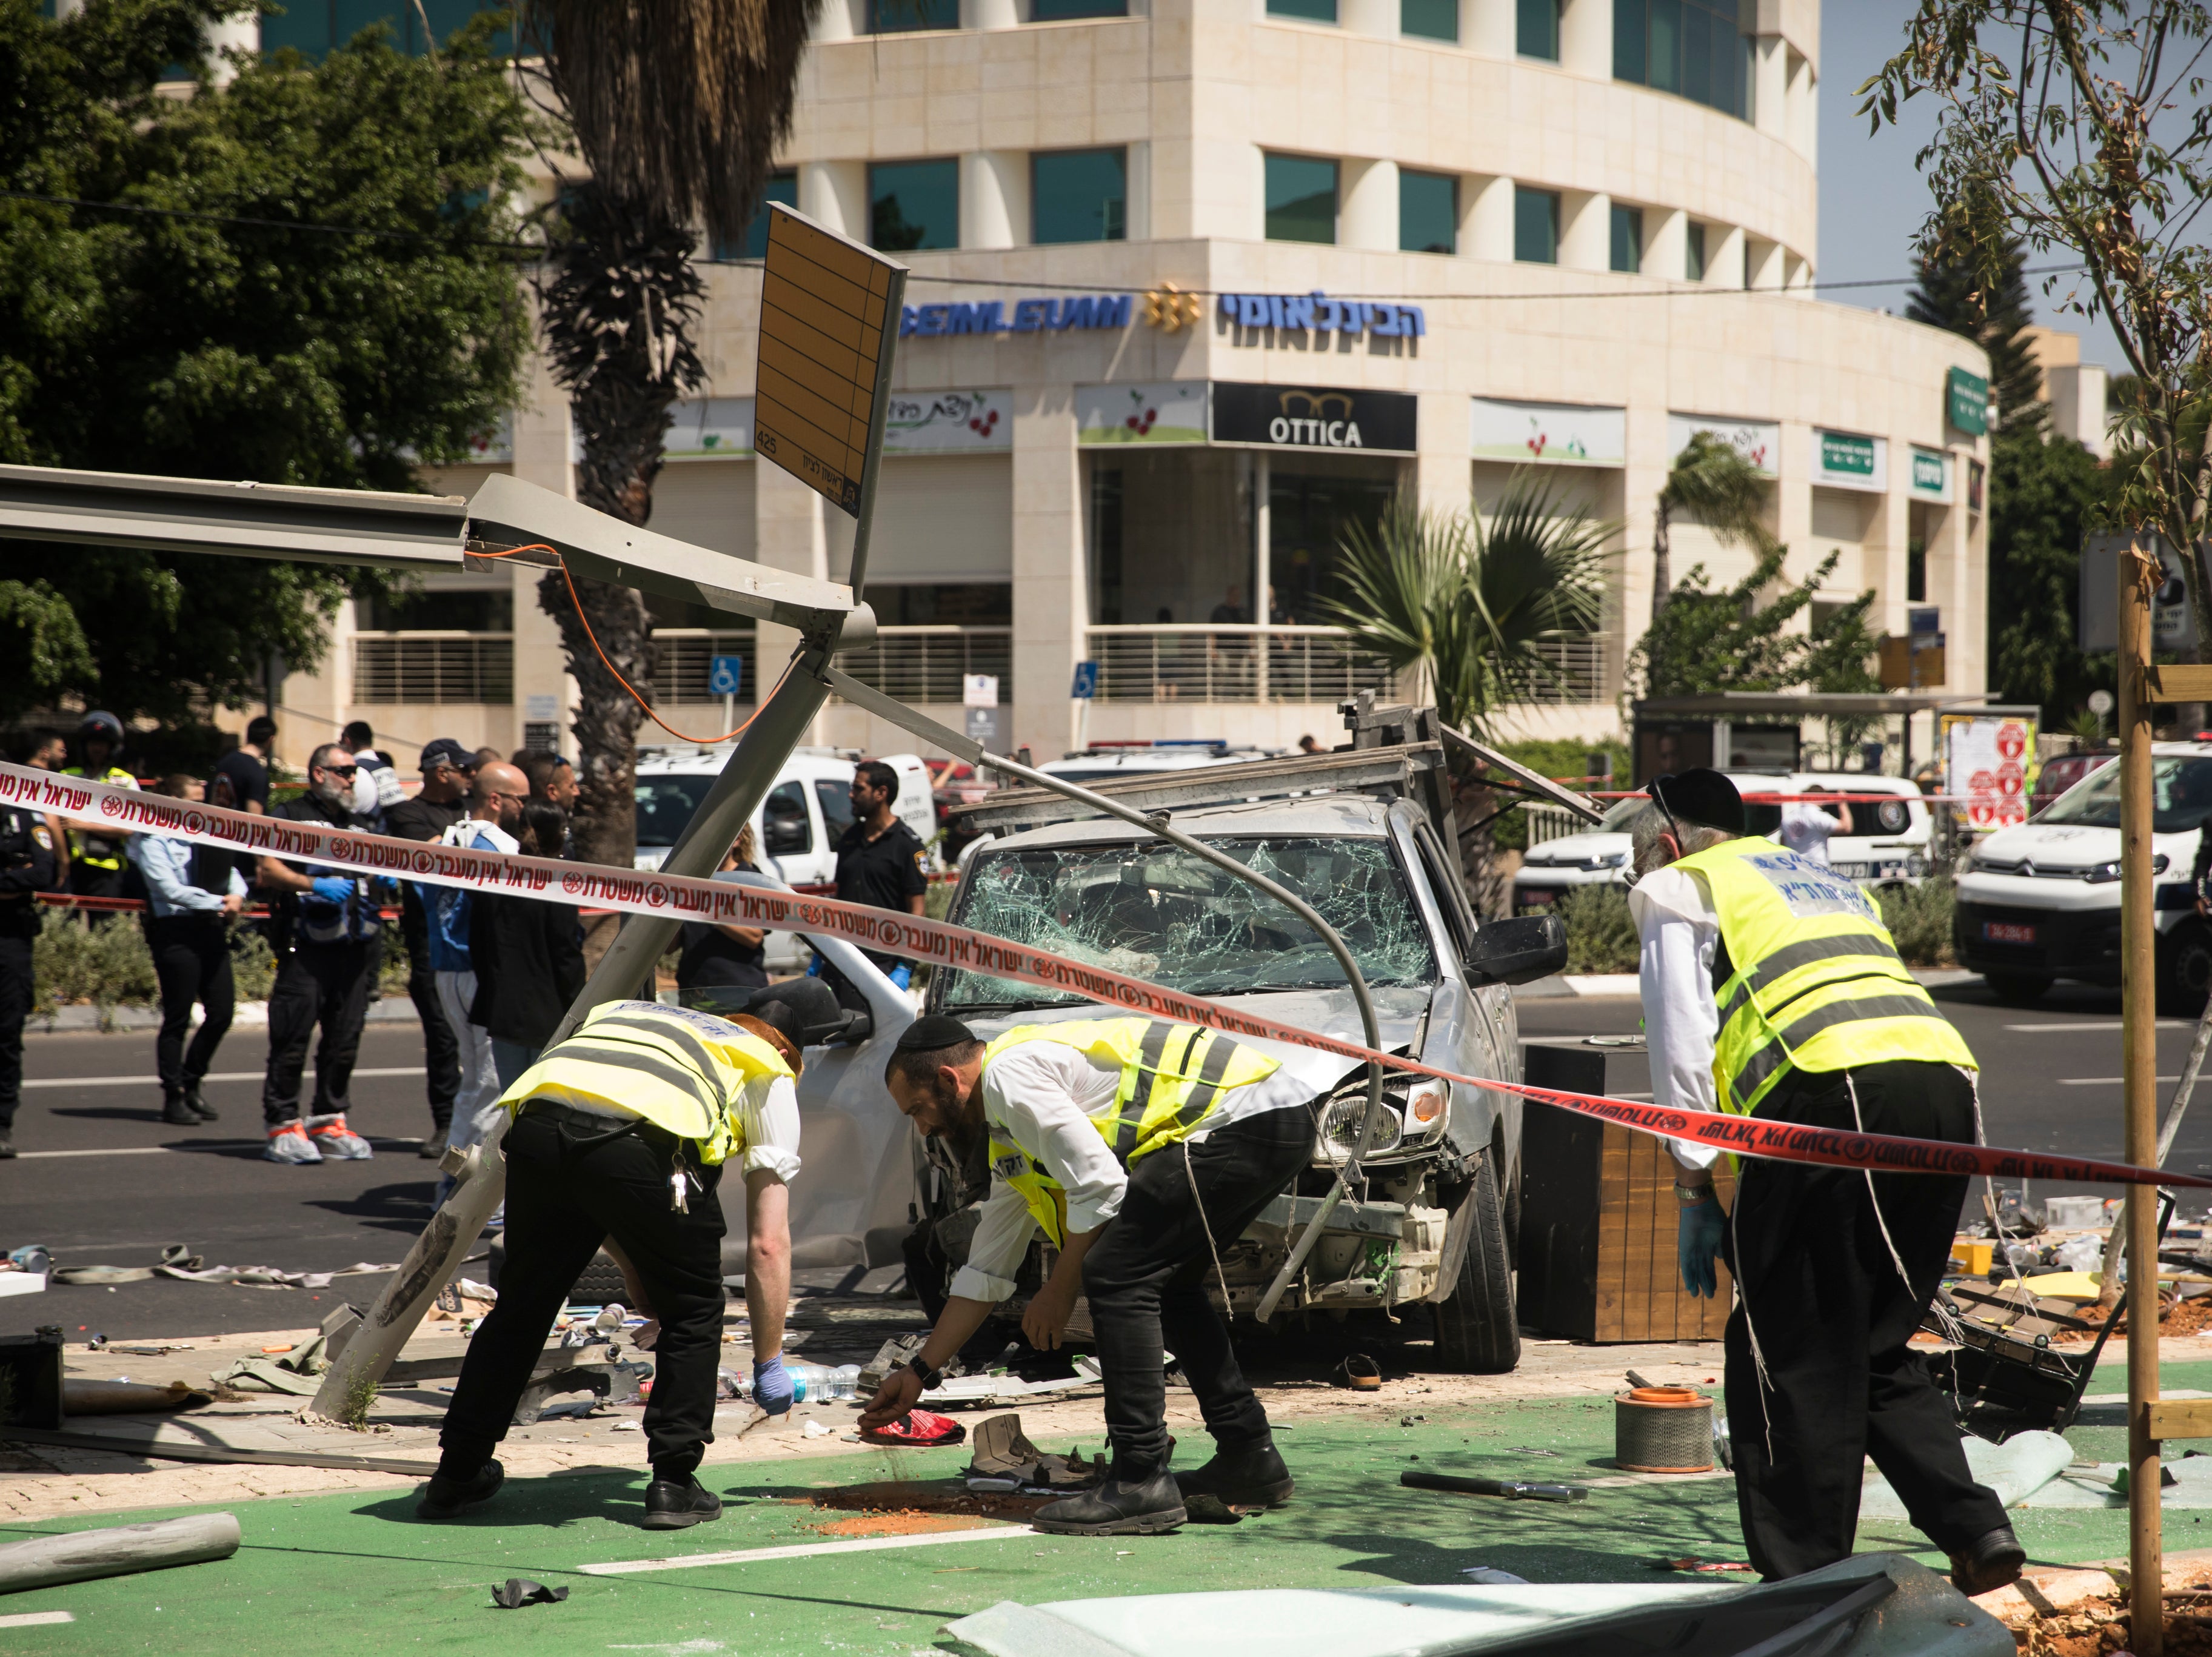 Unrest in Israel has been in the news – can you still travel there?